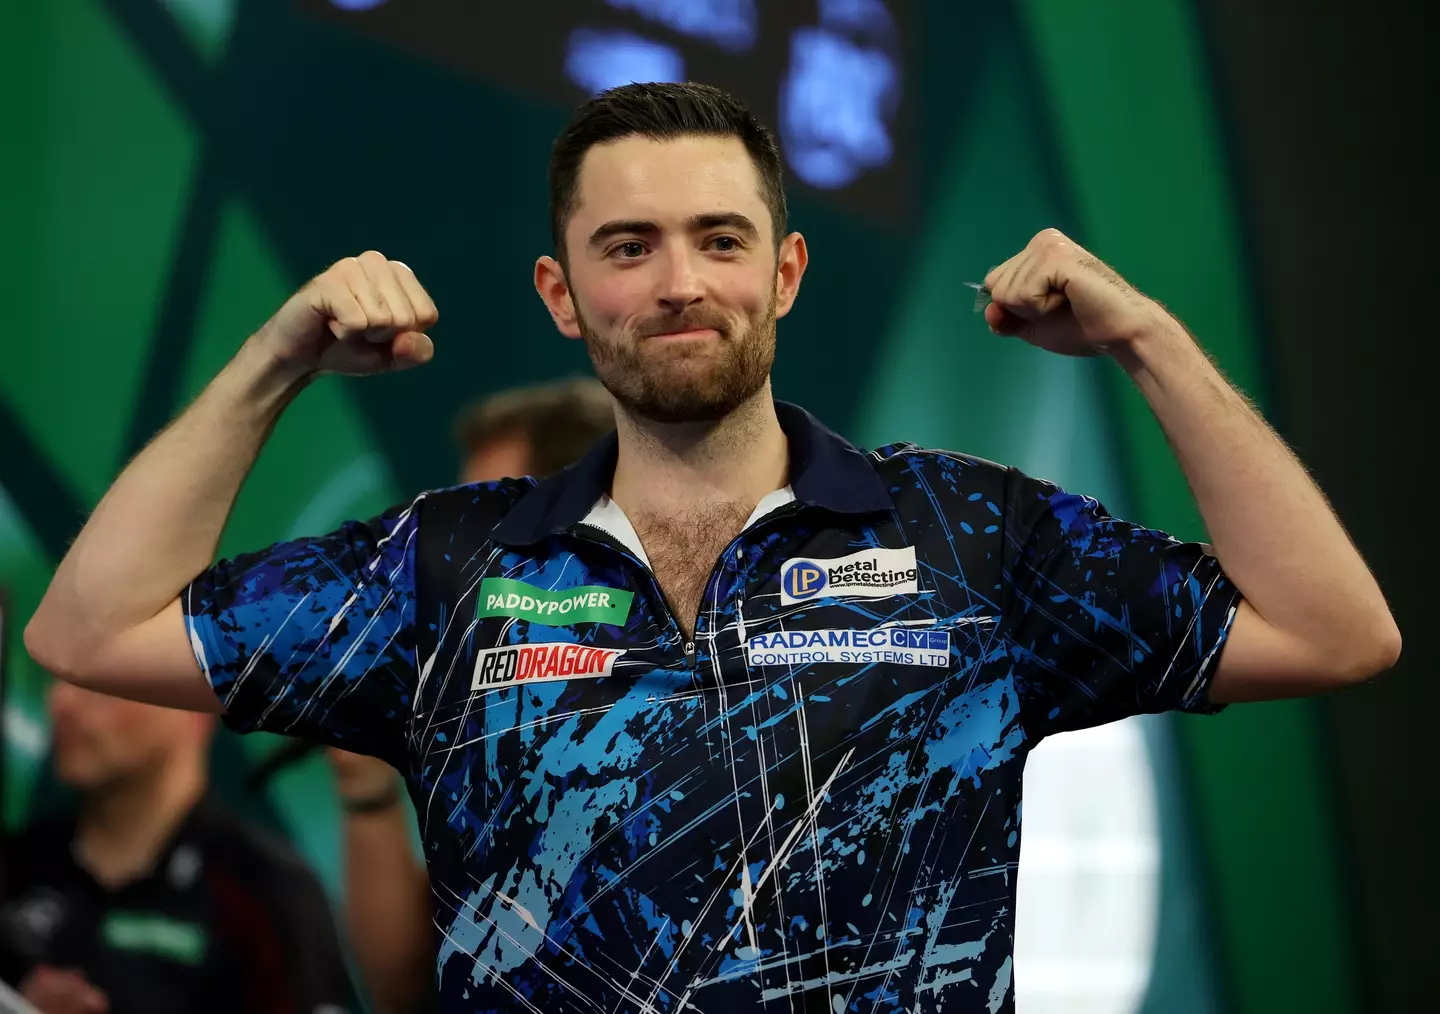 Luke Humphries is the world number one darts player.